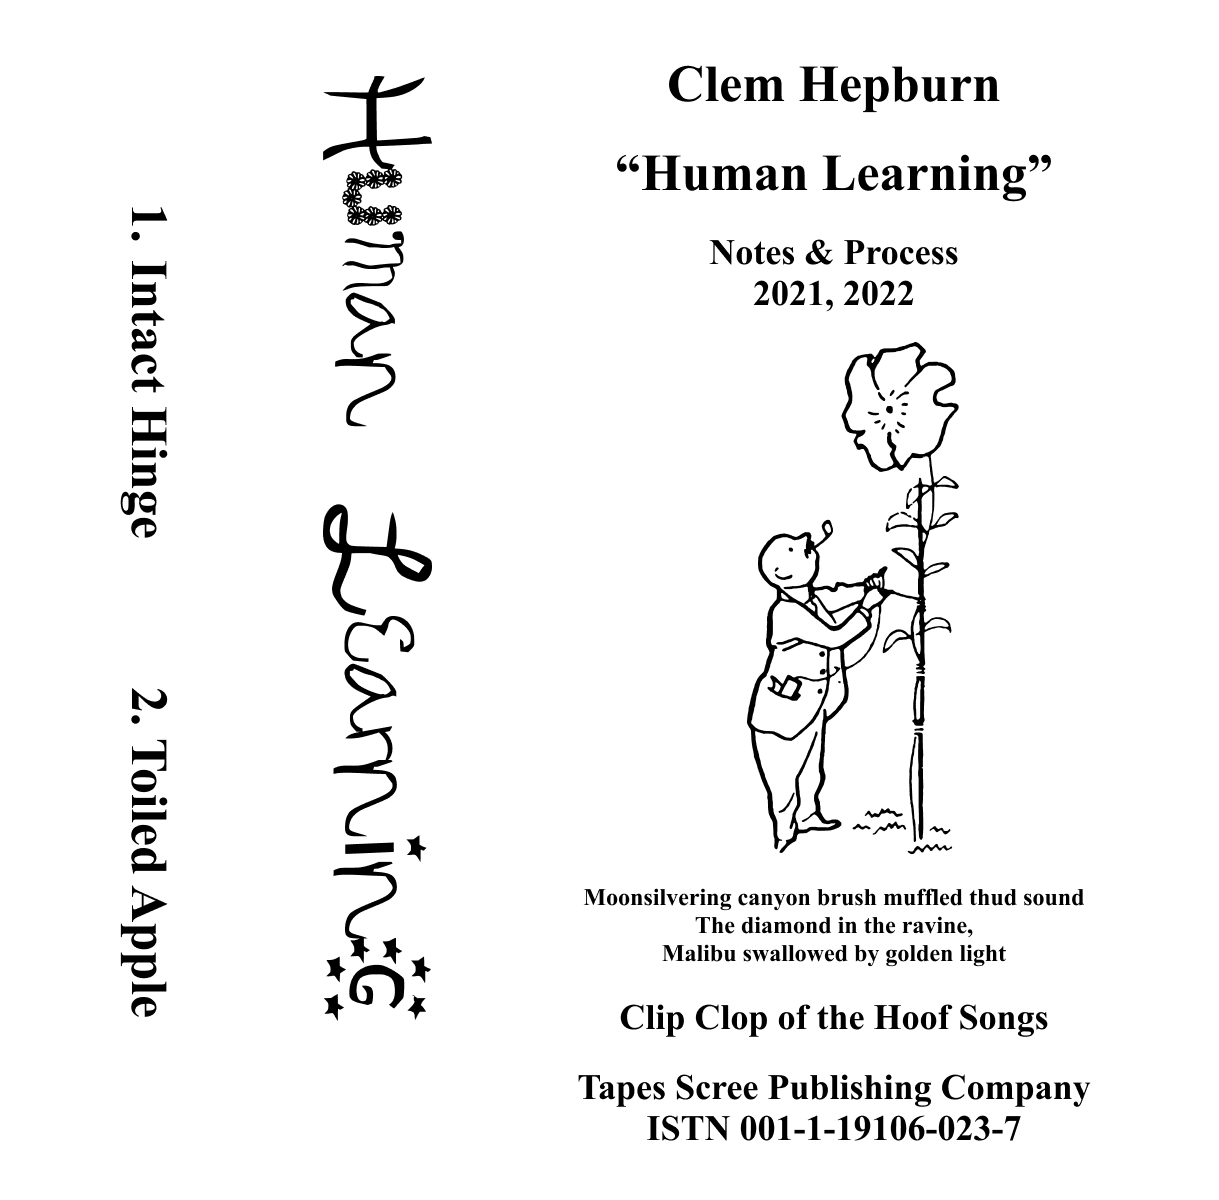 The album art for my most recent cassette tape. It just says my name and the album title ('Human Learning'), and has an illustration of a man securing a very large flower with twine. The flower is taller than the man.